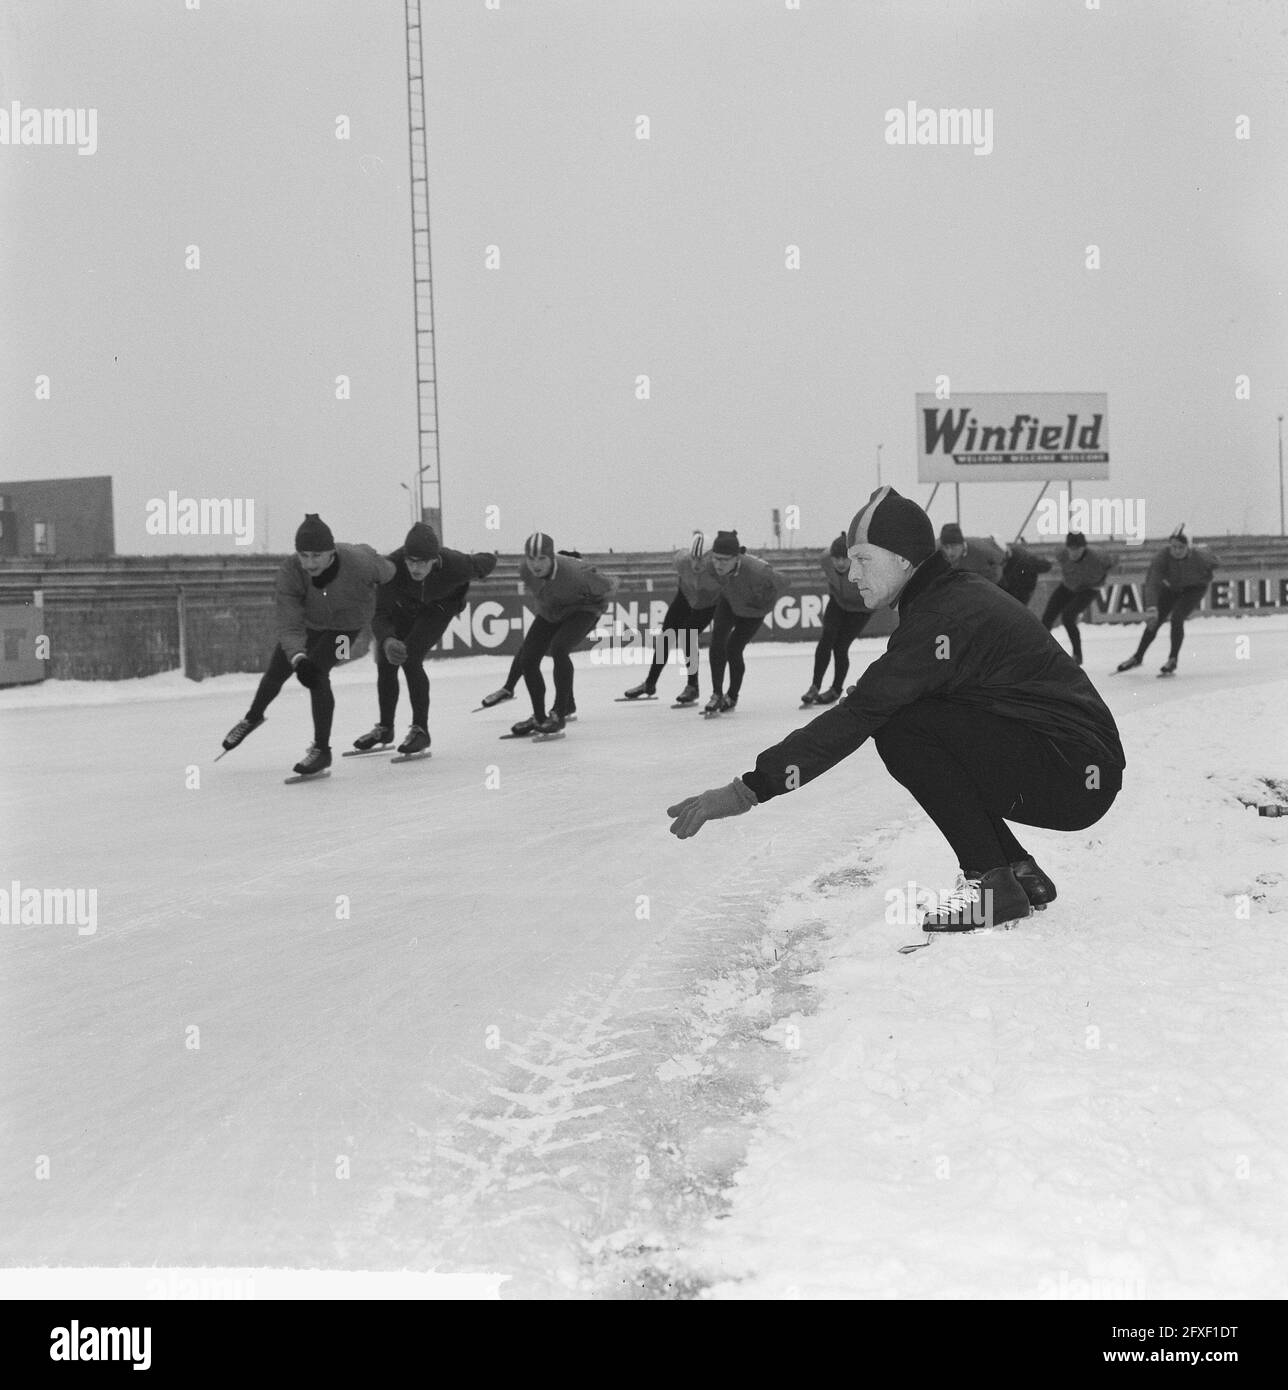 Training for the Dutch core team on the Deventer ice rink. Trainer Lamberts gives riders directions to Van der Grift, Kieviet, Heyst, Liebrechts, Nottet, Renes, December 12, 1963, directions, skating, sports, trainers, The Netherlands, 20th century press agency photo, news to remember, documentary, historic photography 1945-1990, visual stories, human history of the Twentieth Century, capturing moments in time Stock Photo